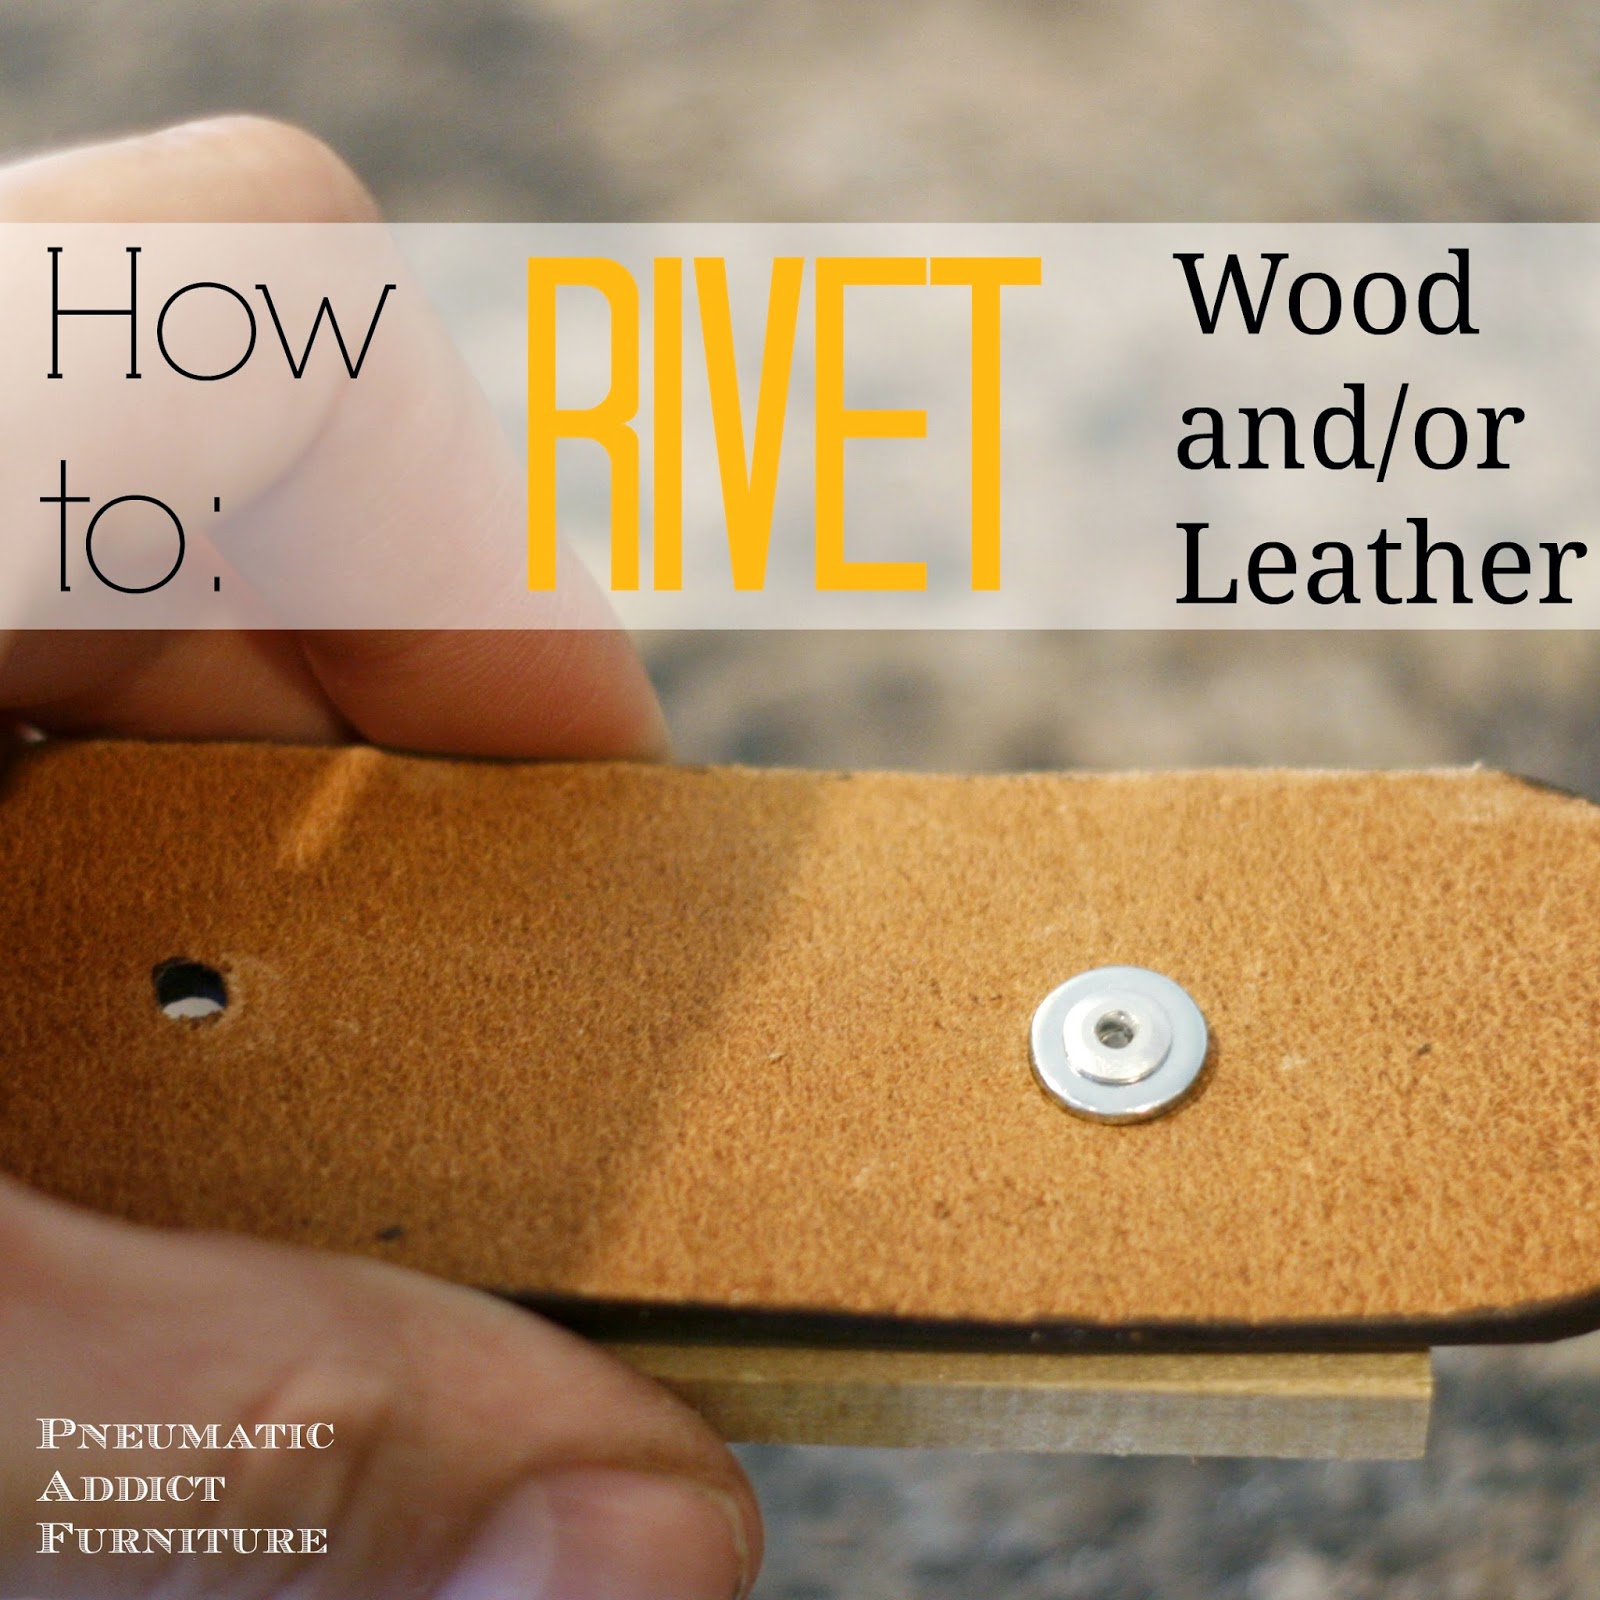 How to Rivet Wood and/or Leather Pneumatic Addict